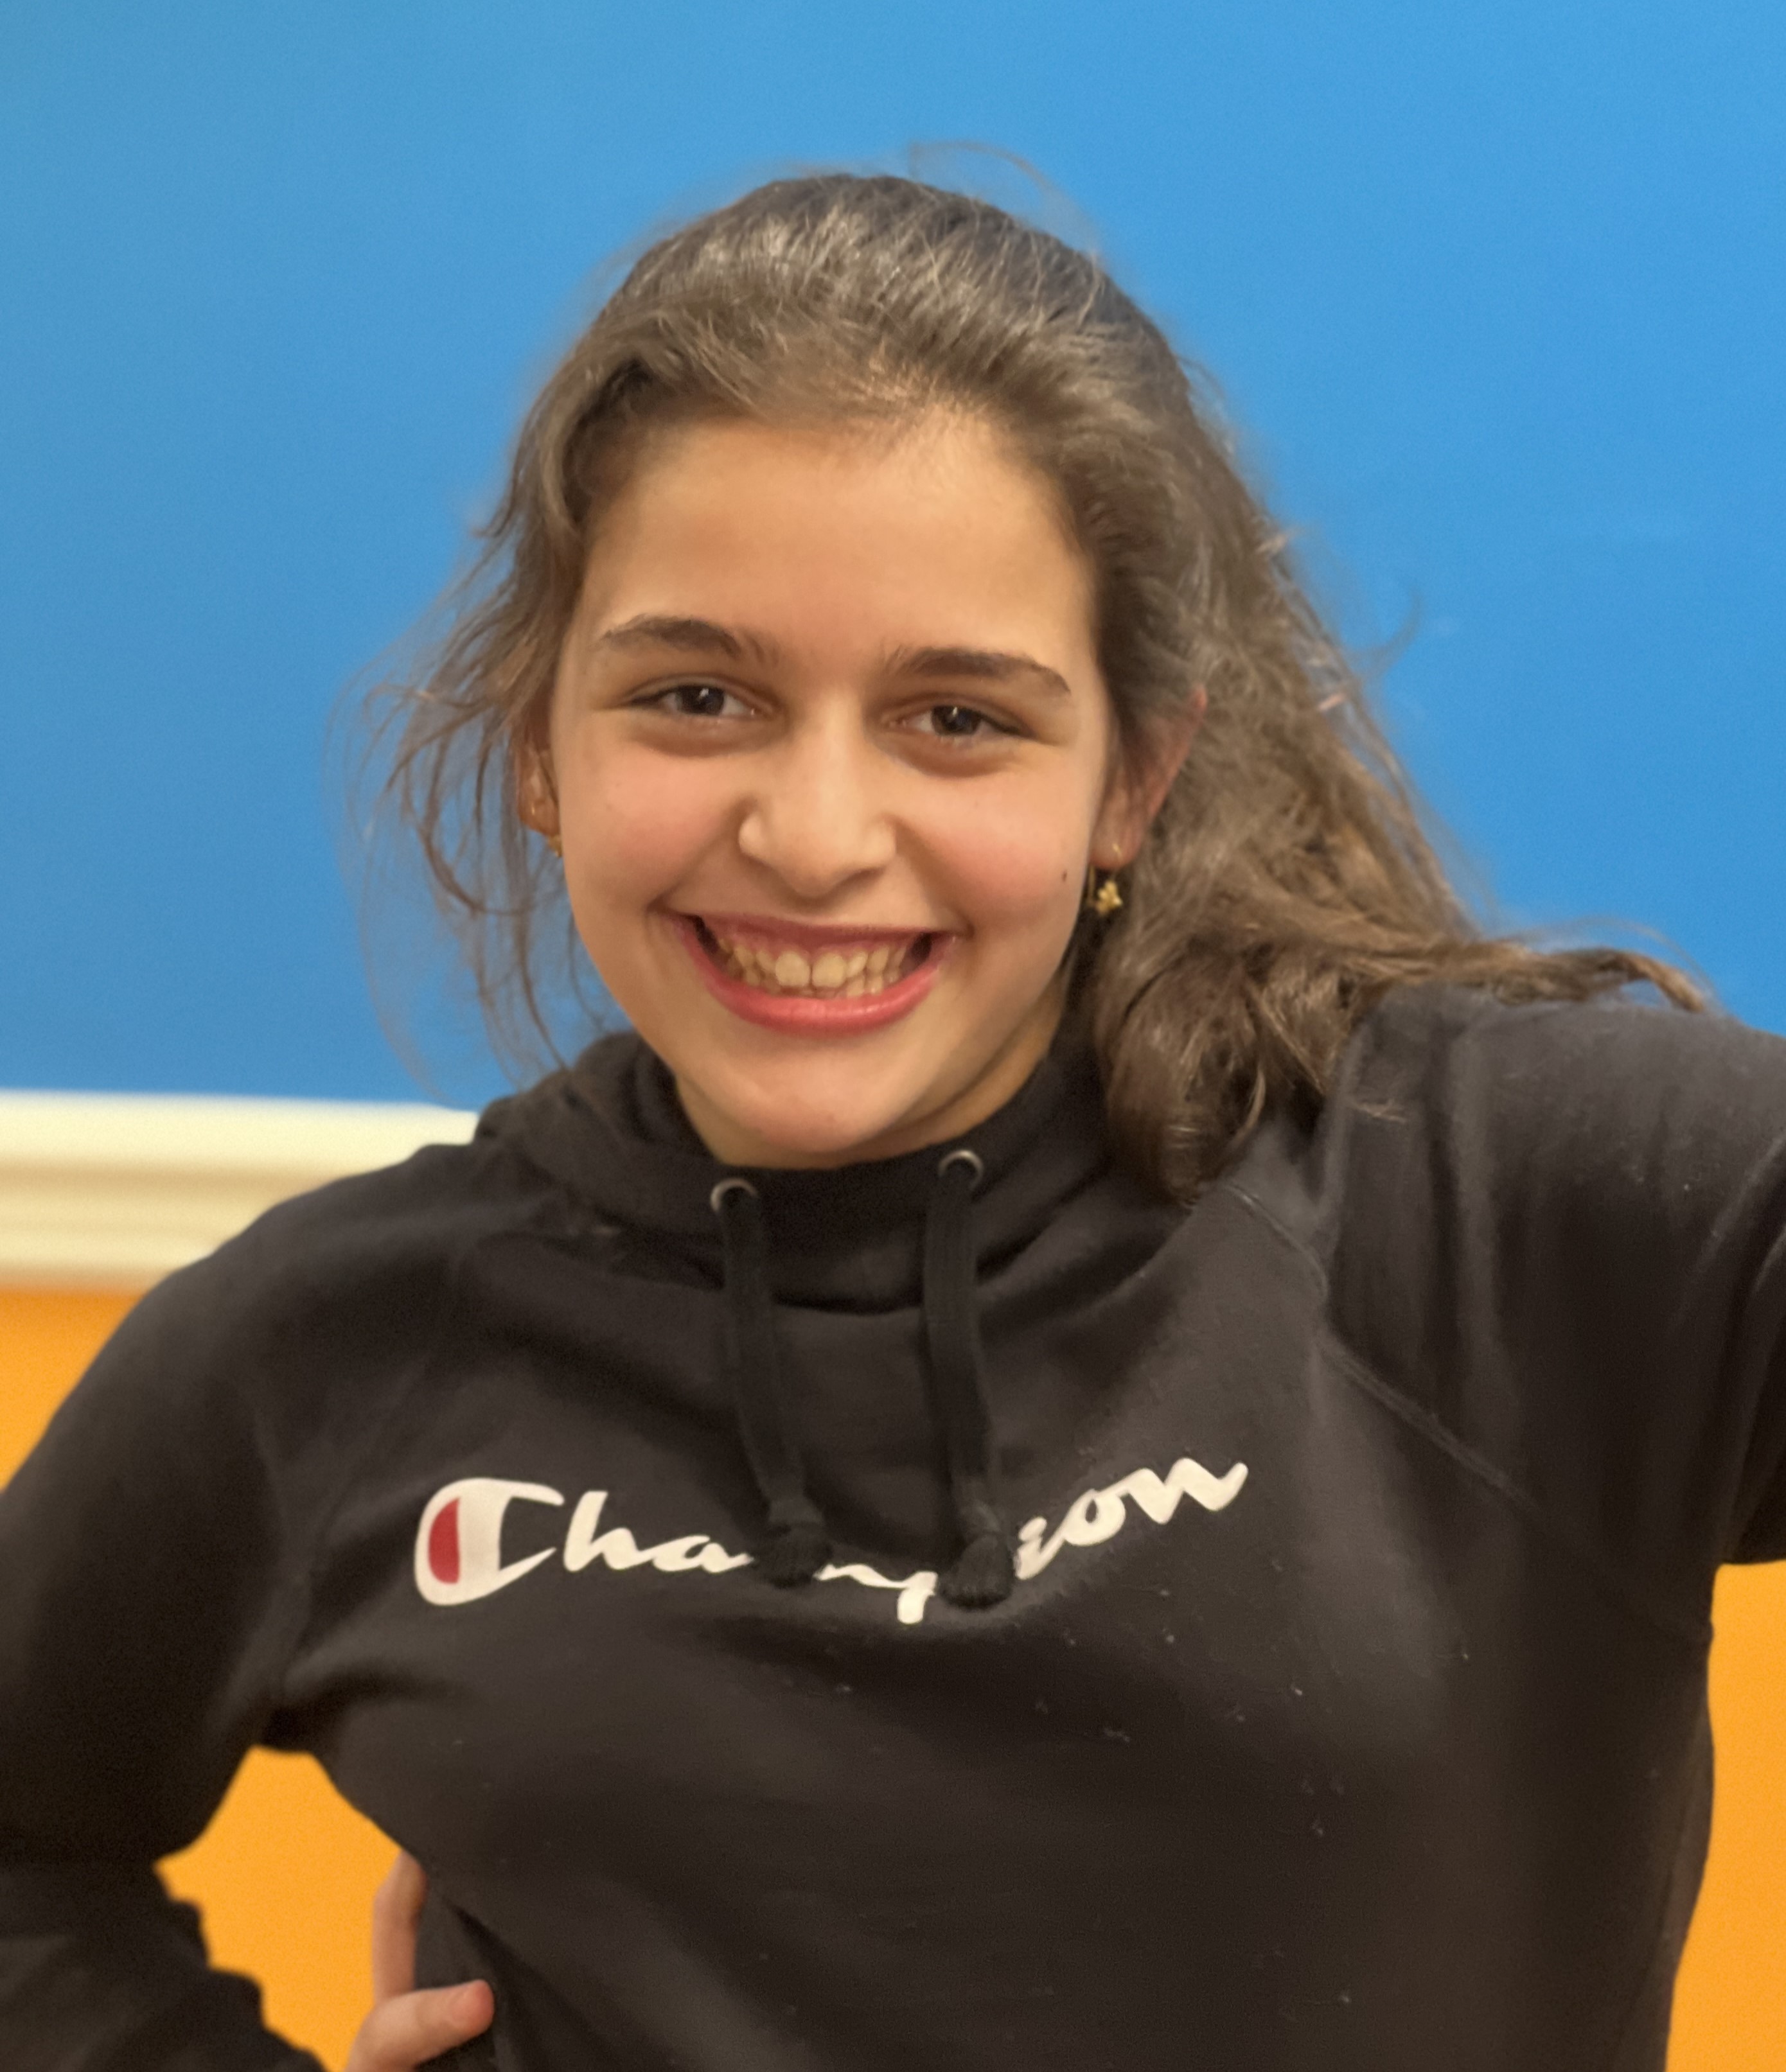 Genie Academy student joins more advanced classes